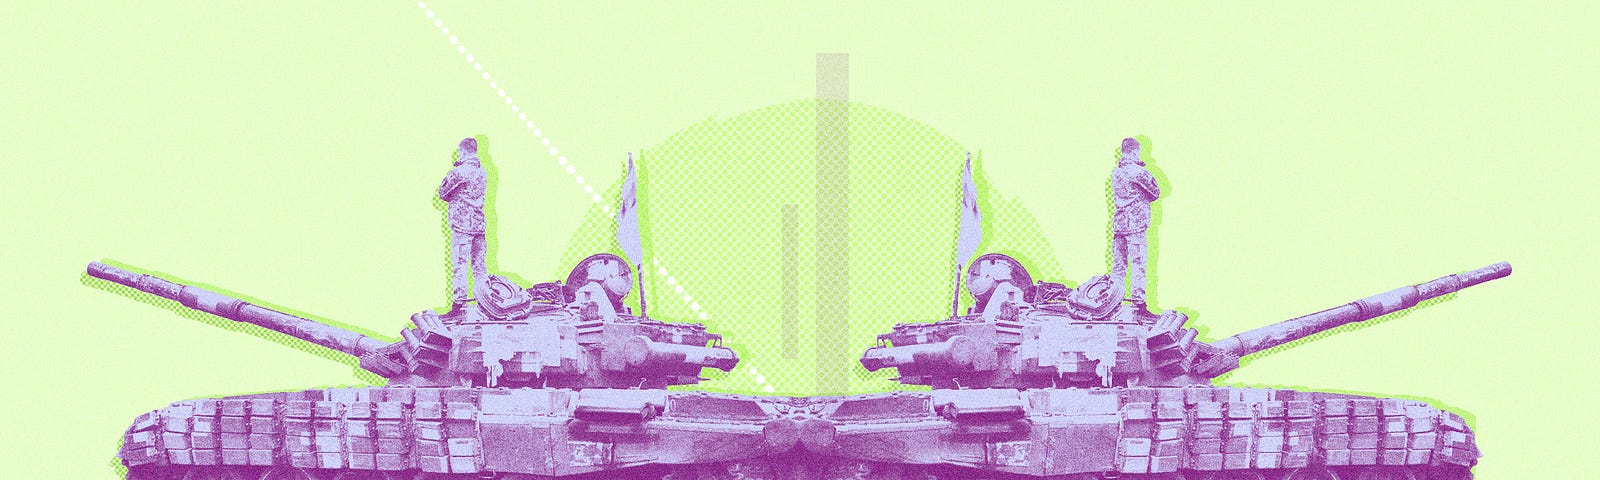 Two tanks in magenta over a neon green background. Photo illustration by Alyson Youngblood, photo from 24th Mechanized Brigade “King Danylo” / CC BY 4.0